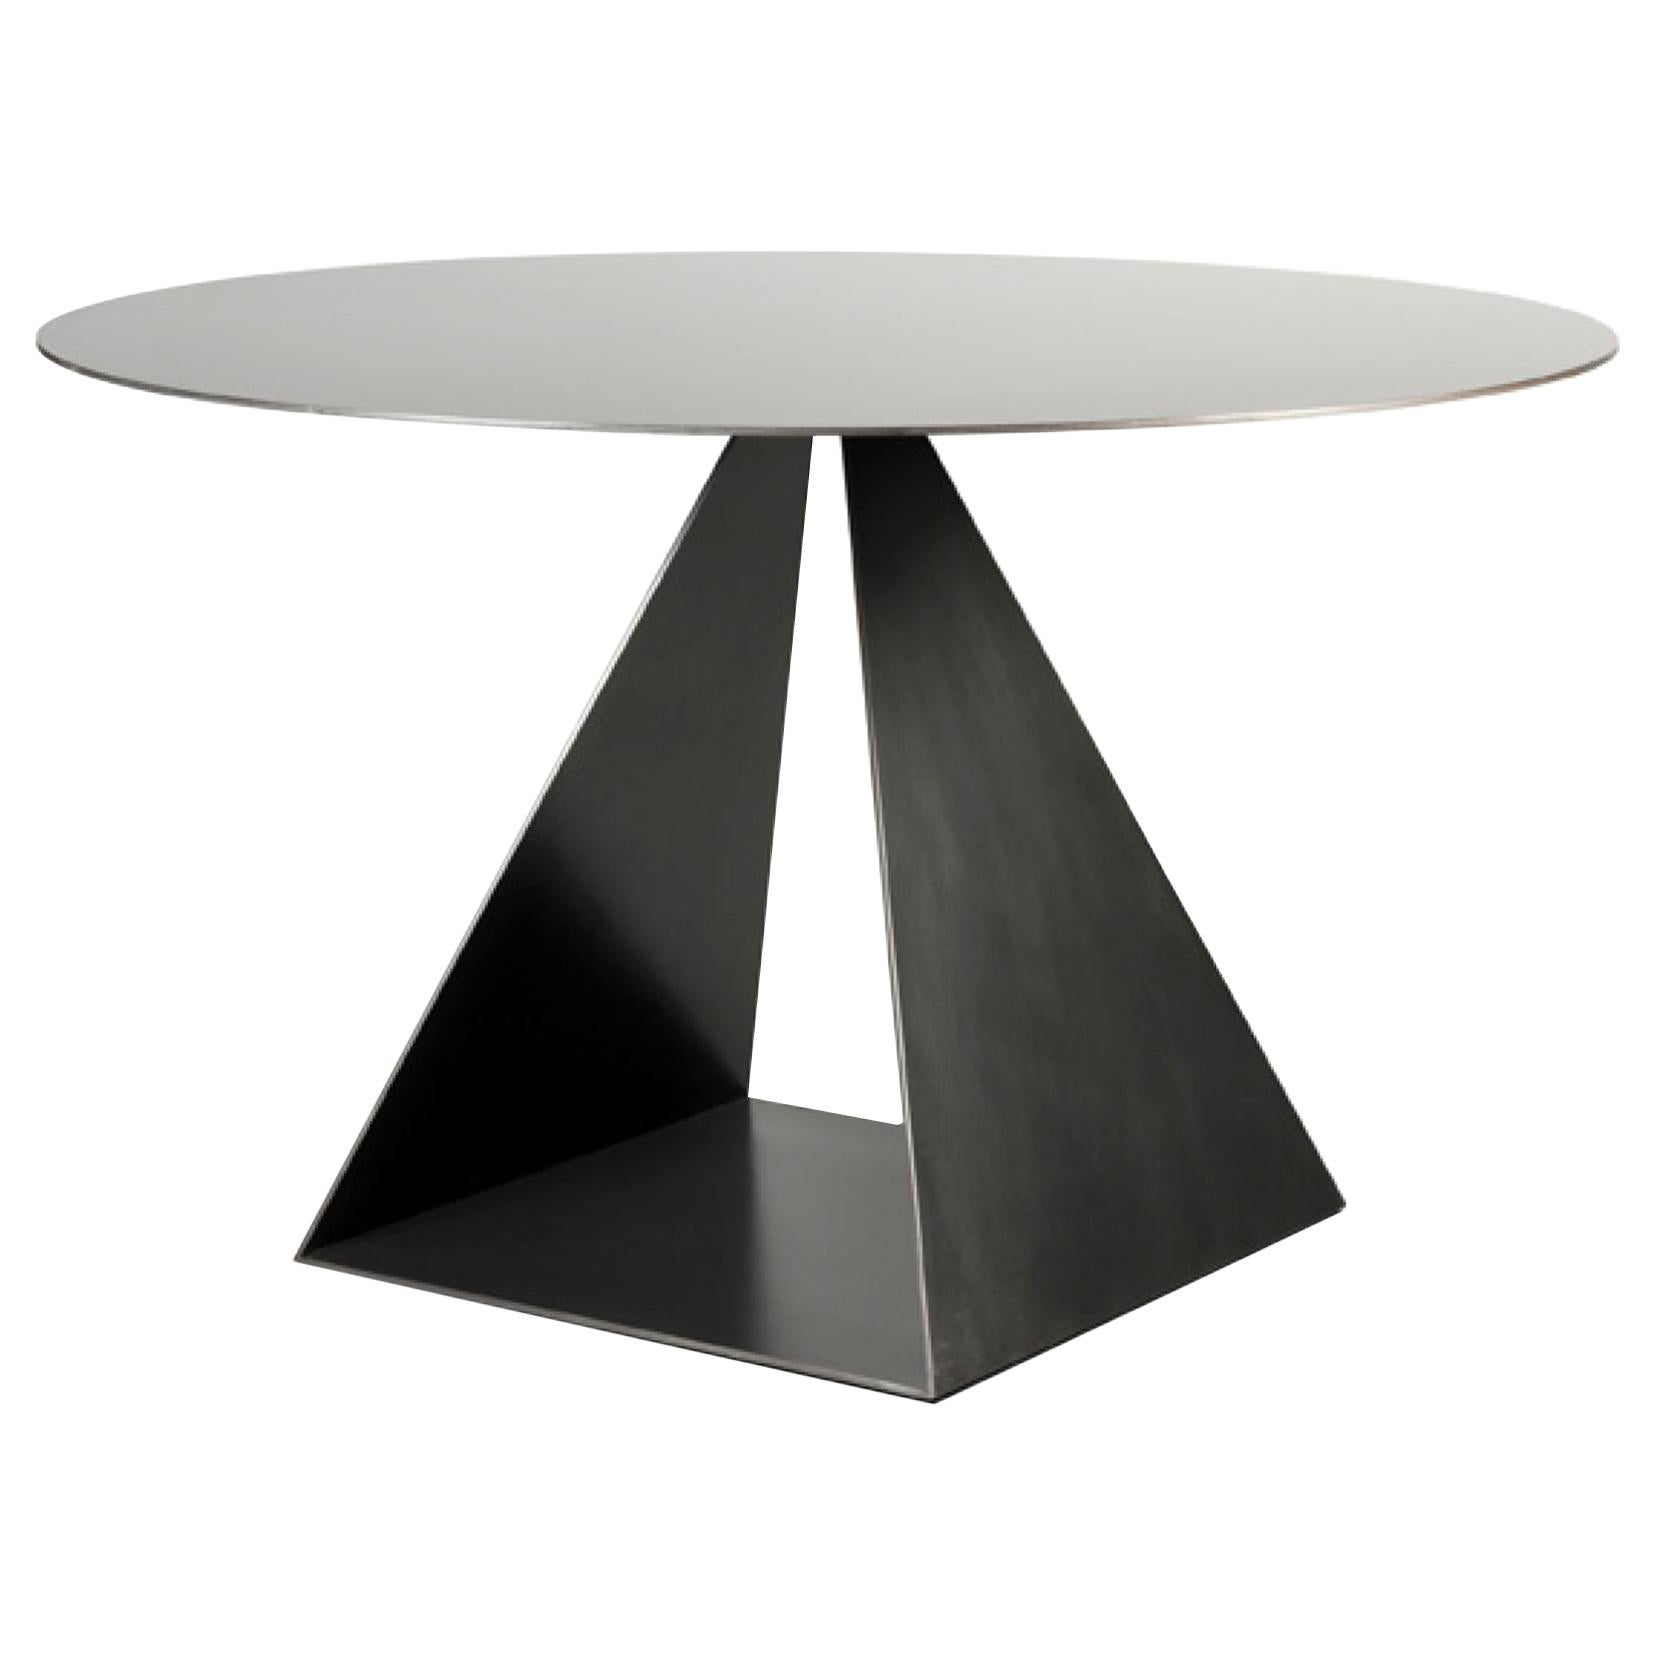 Geometric Triangle Round Top Metal Dining Table Blackened Finish customizable For Sale